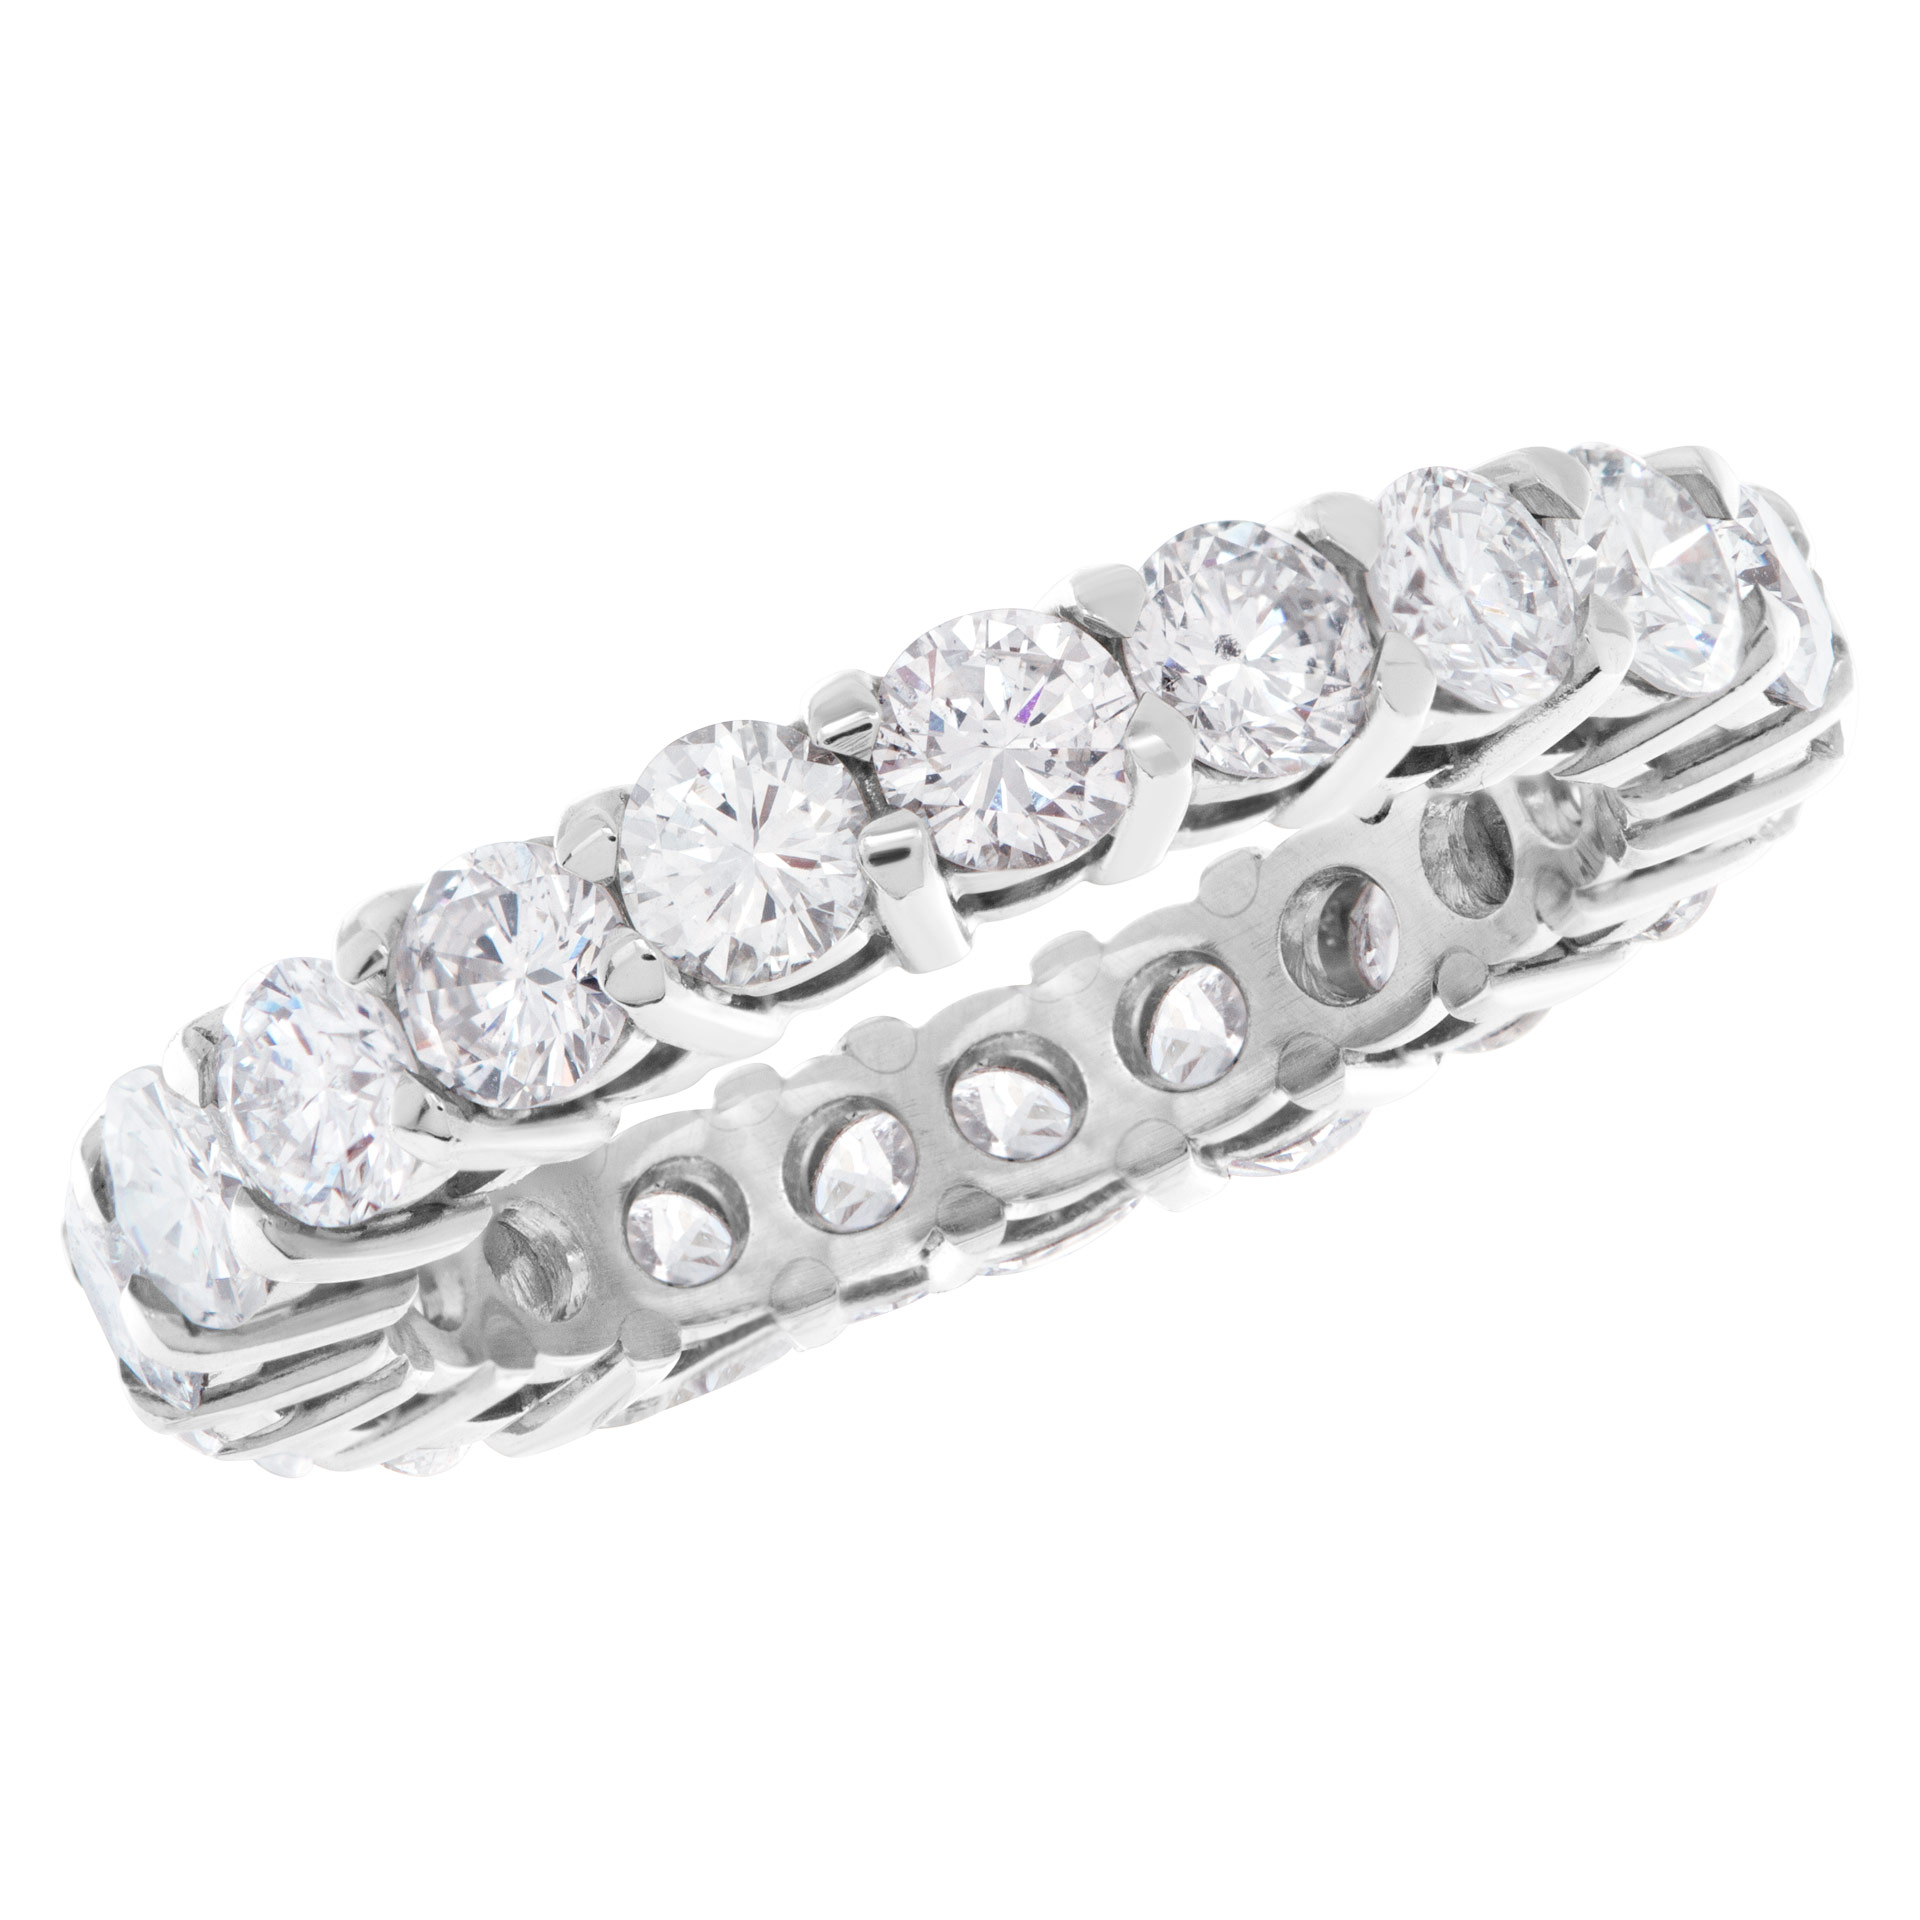 Round brilliant cut Diamonds eternity band in Platinum. Round brilliant cut diamonds total approx. weight: 2.72 carats. Size 5.75 image 3